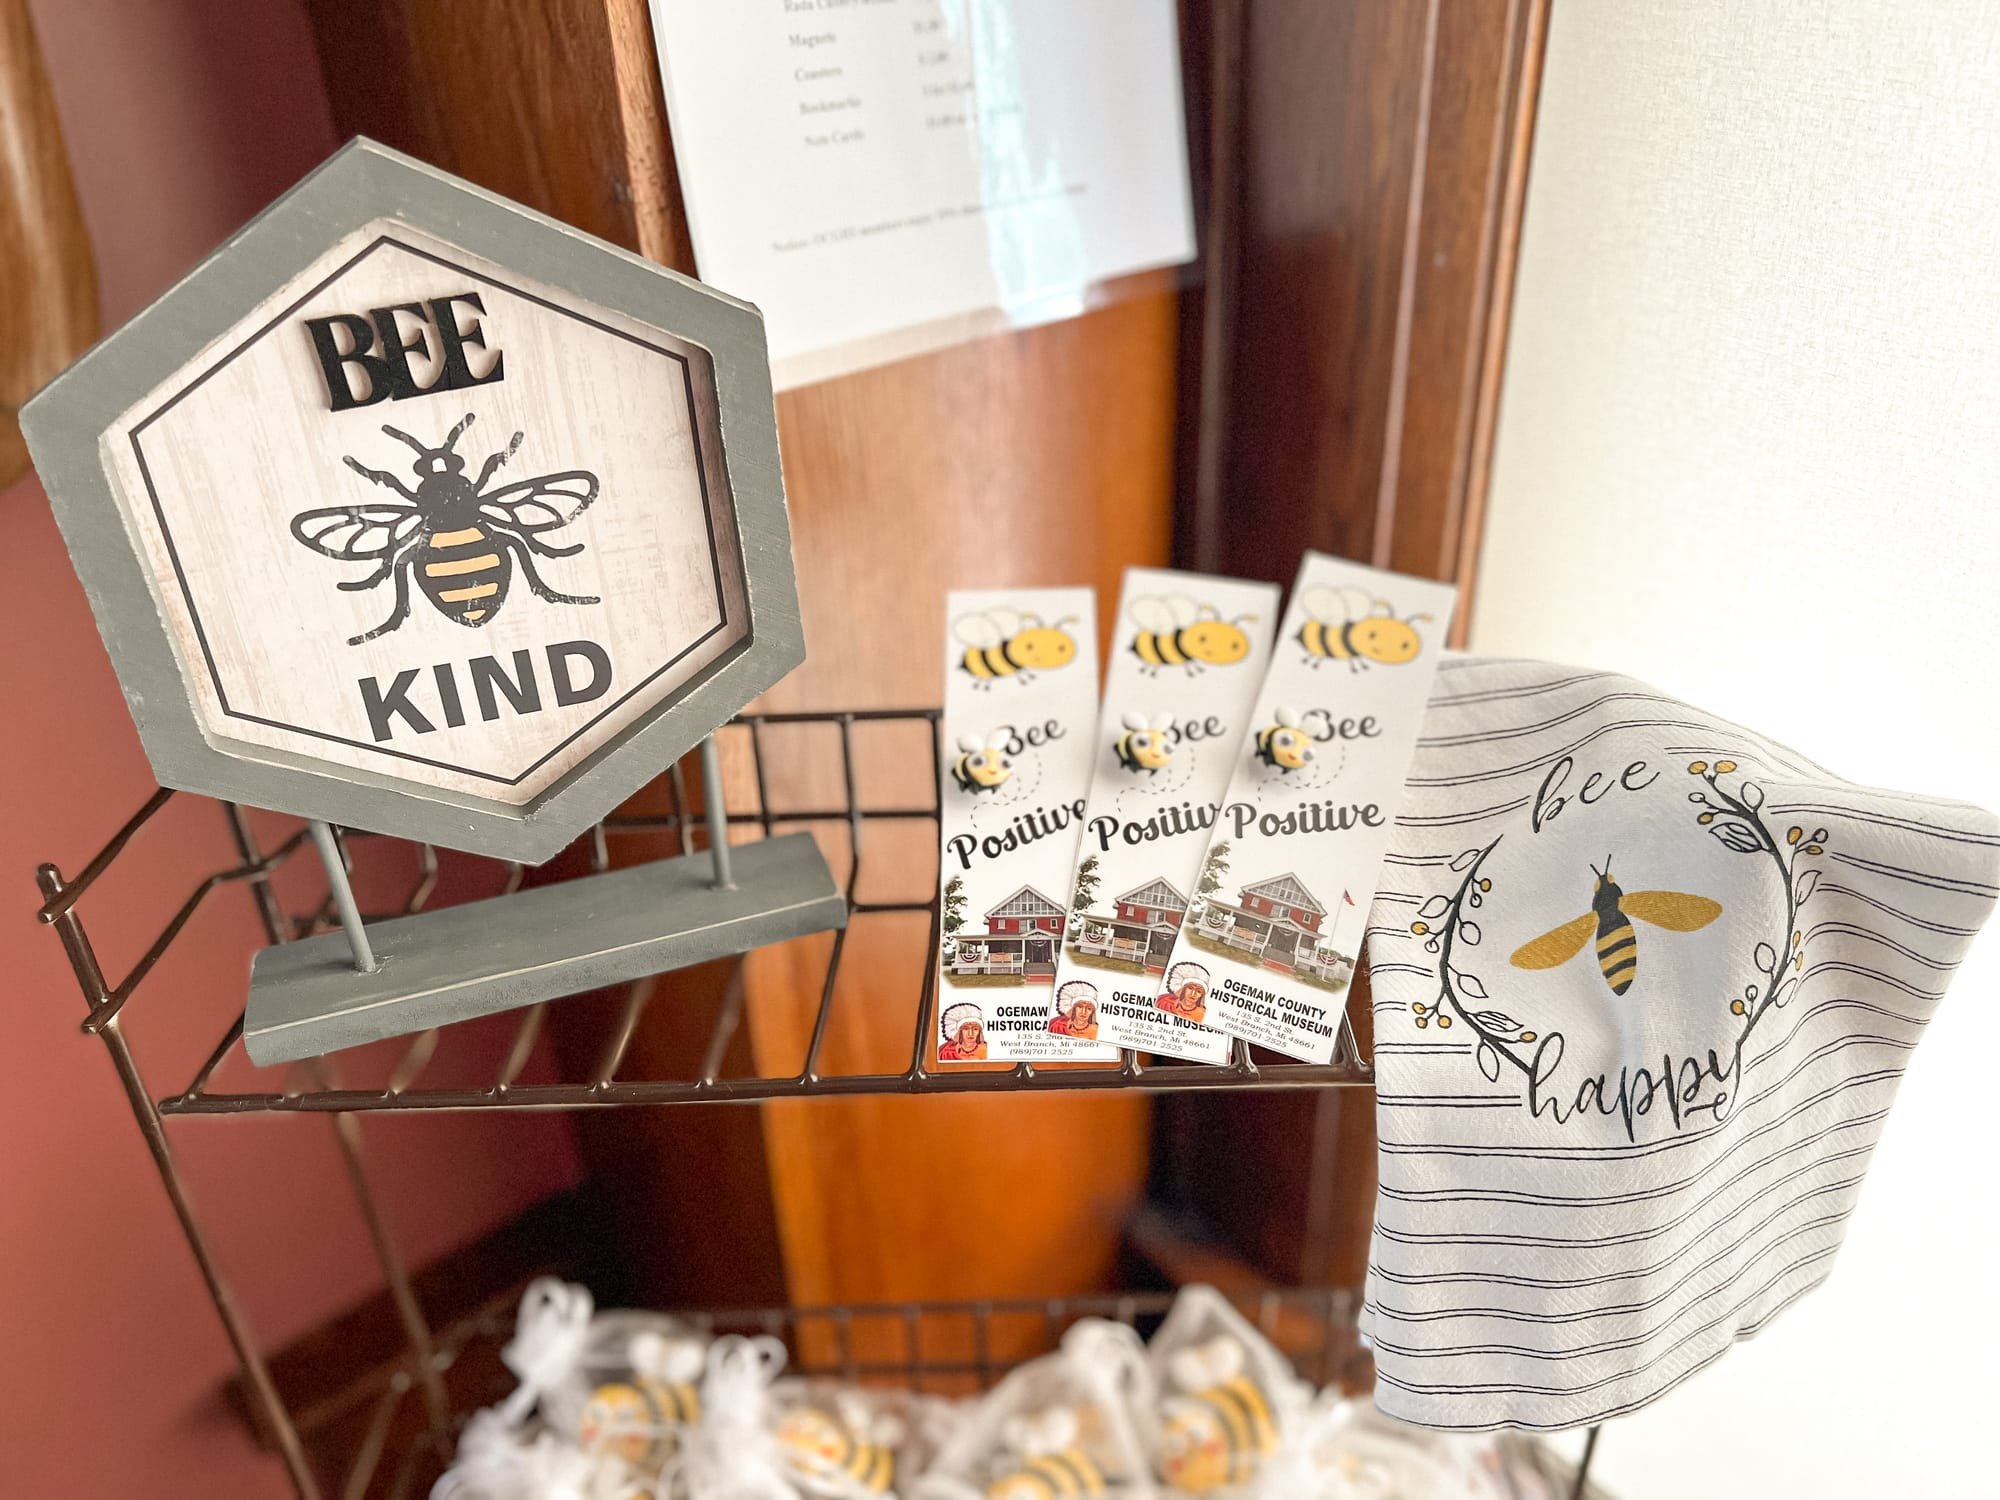 A part of the "Bee Positive" Collection that is for sale in the Book Nook.